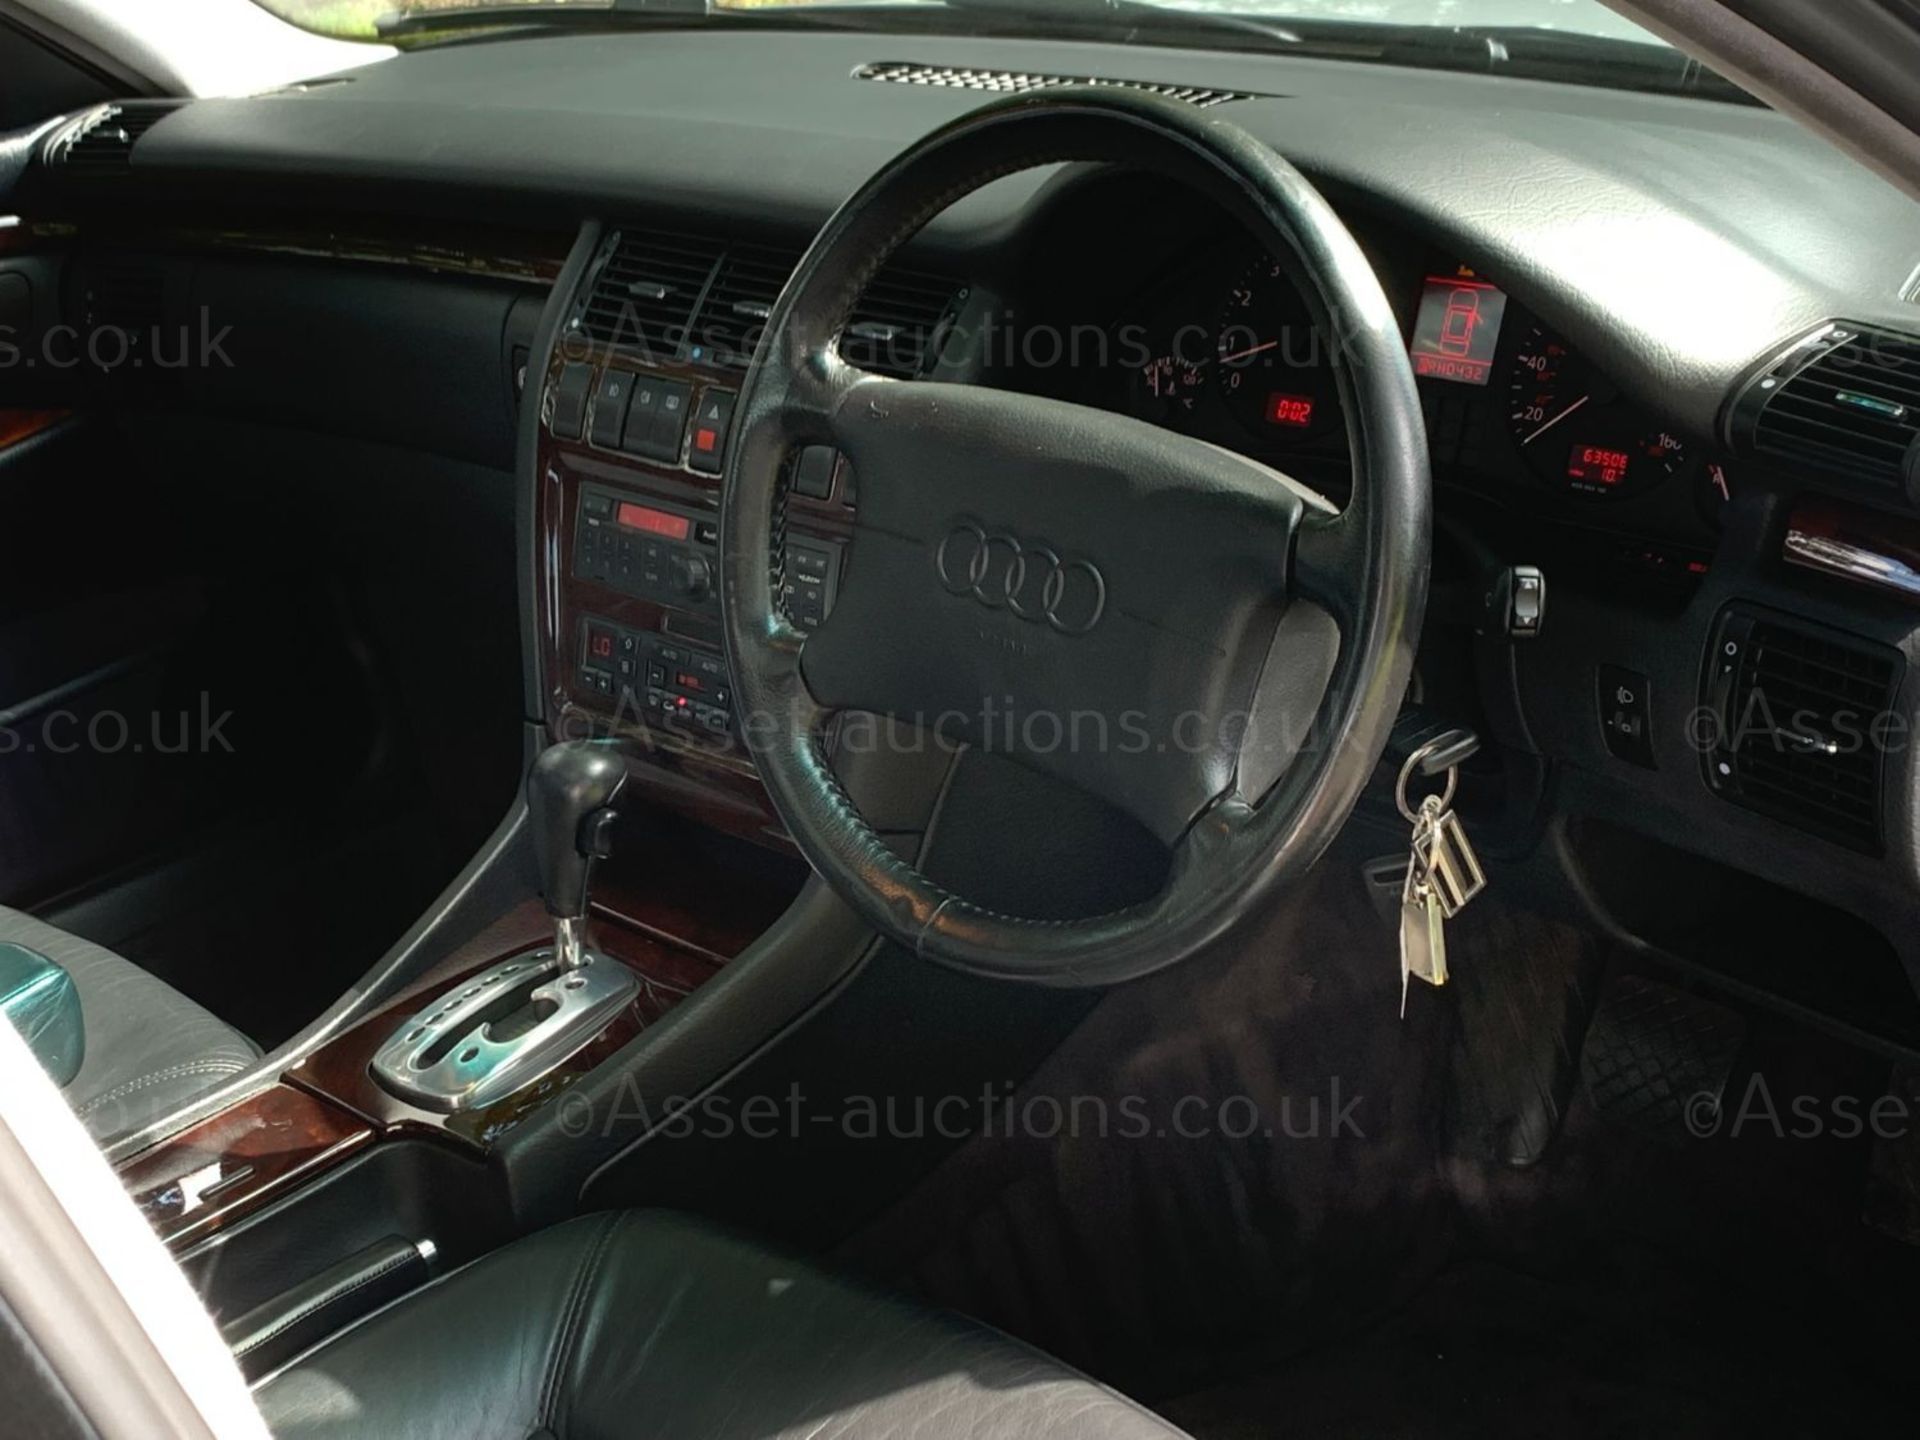 1997 AUDI A8 2.8 AUTO, GENUINE 63K MILES FROM NEW AUMINIUM SILVER, DARK BLUE LEATHER INTERIOR - Image 8 of 10